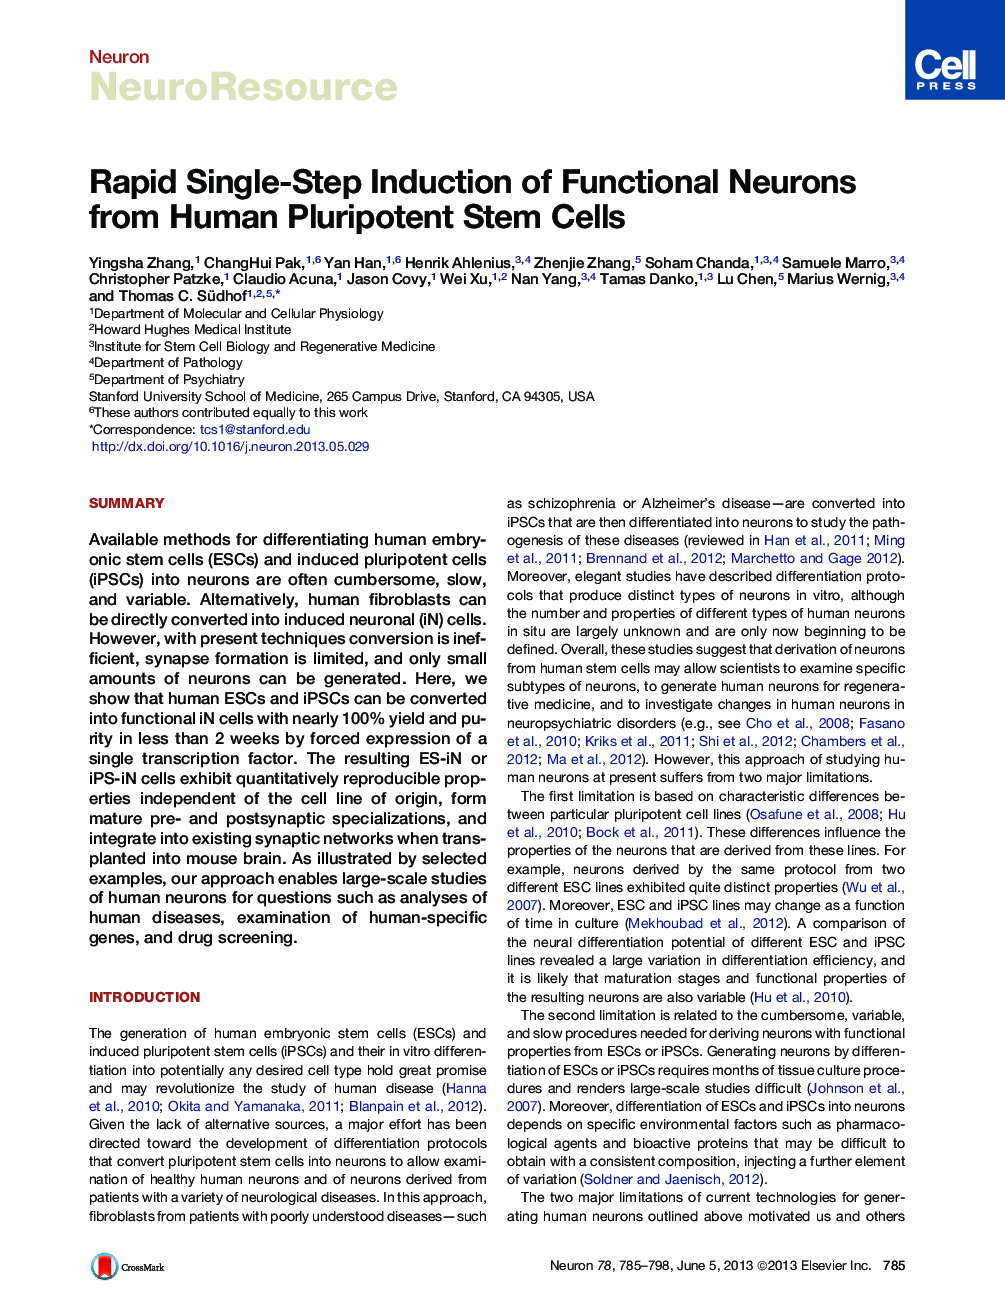 Rapid Single-Step Induction of Functional Neurons from Human Pluripotent Stem Cells